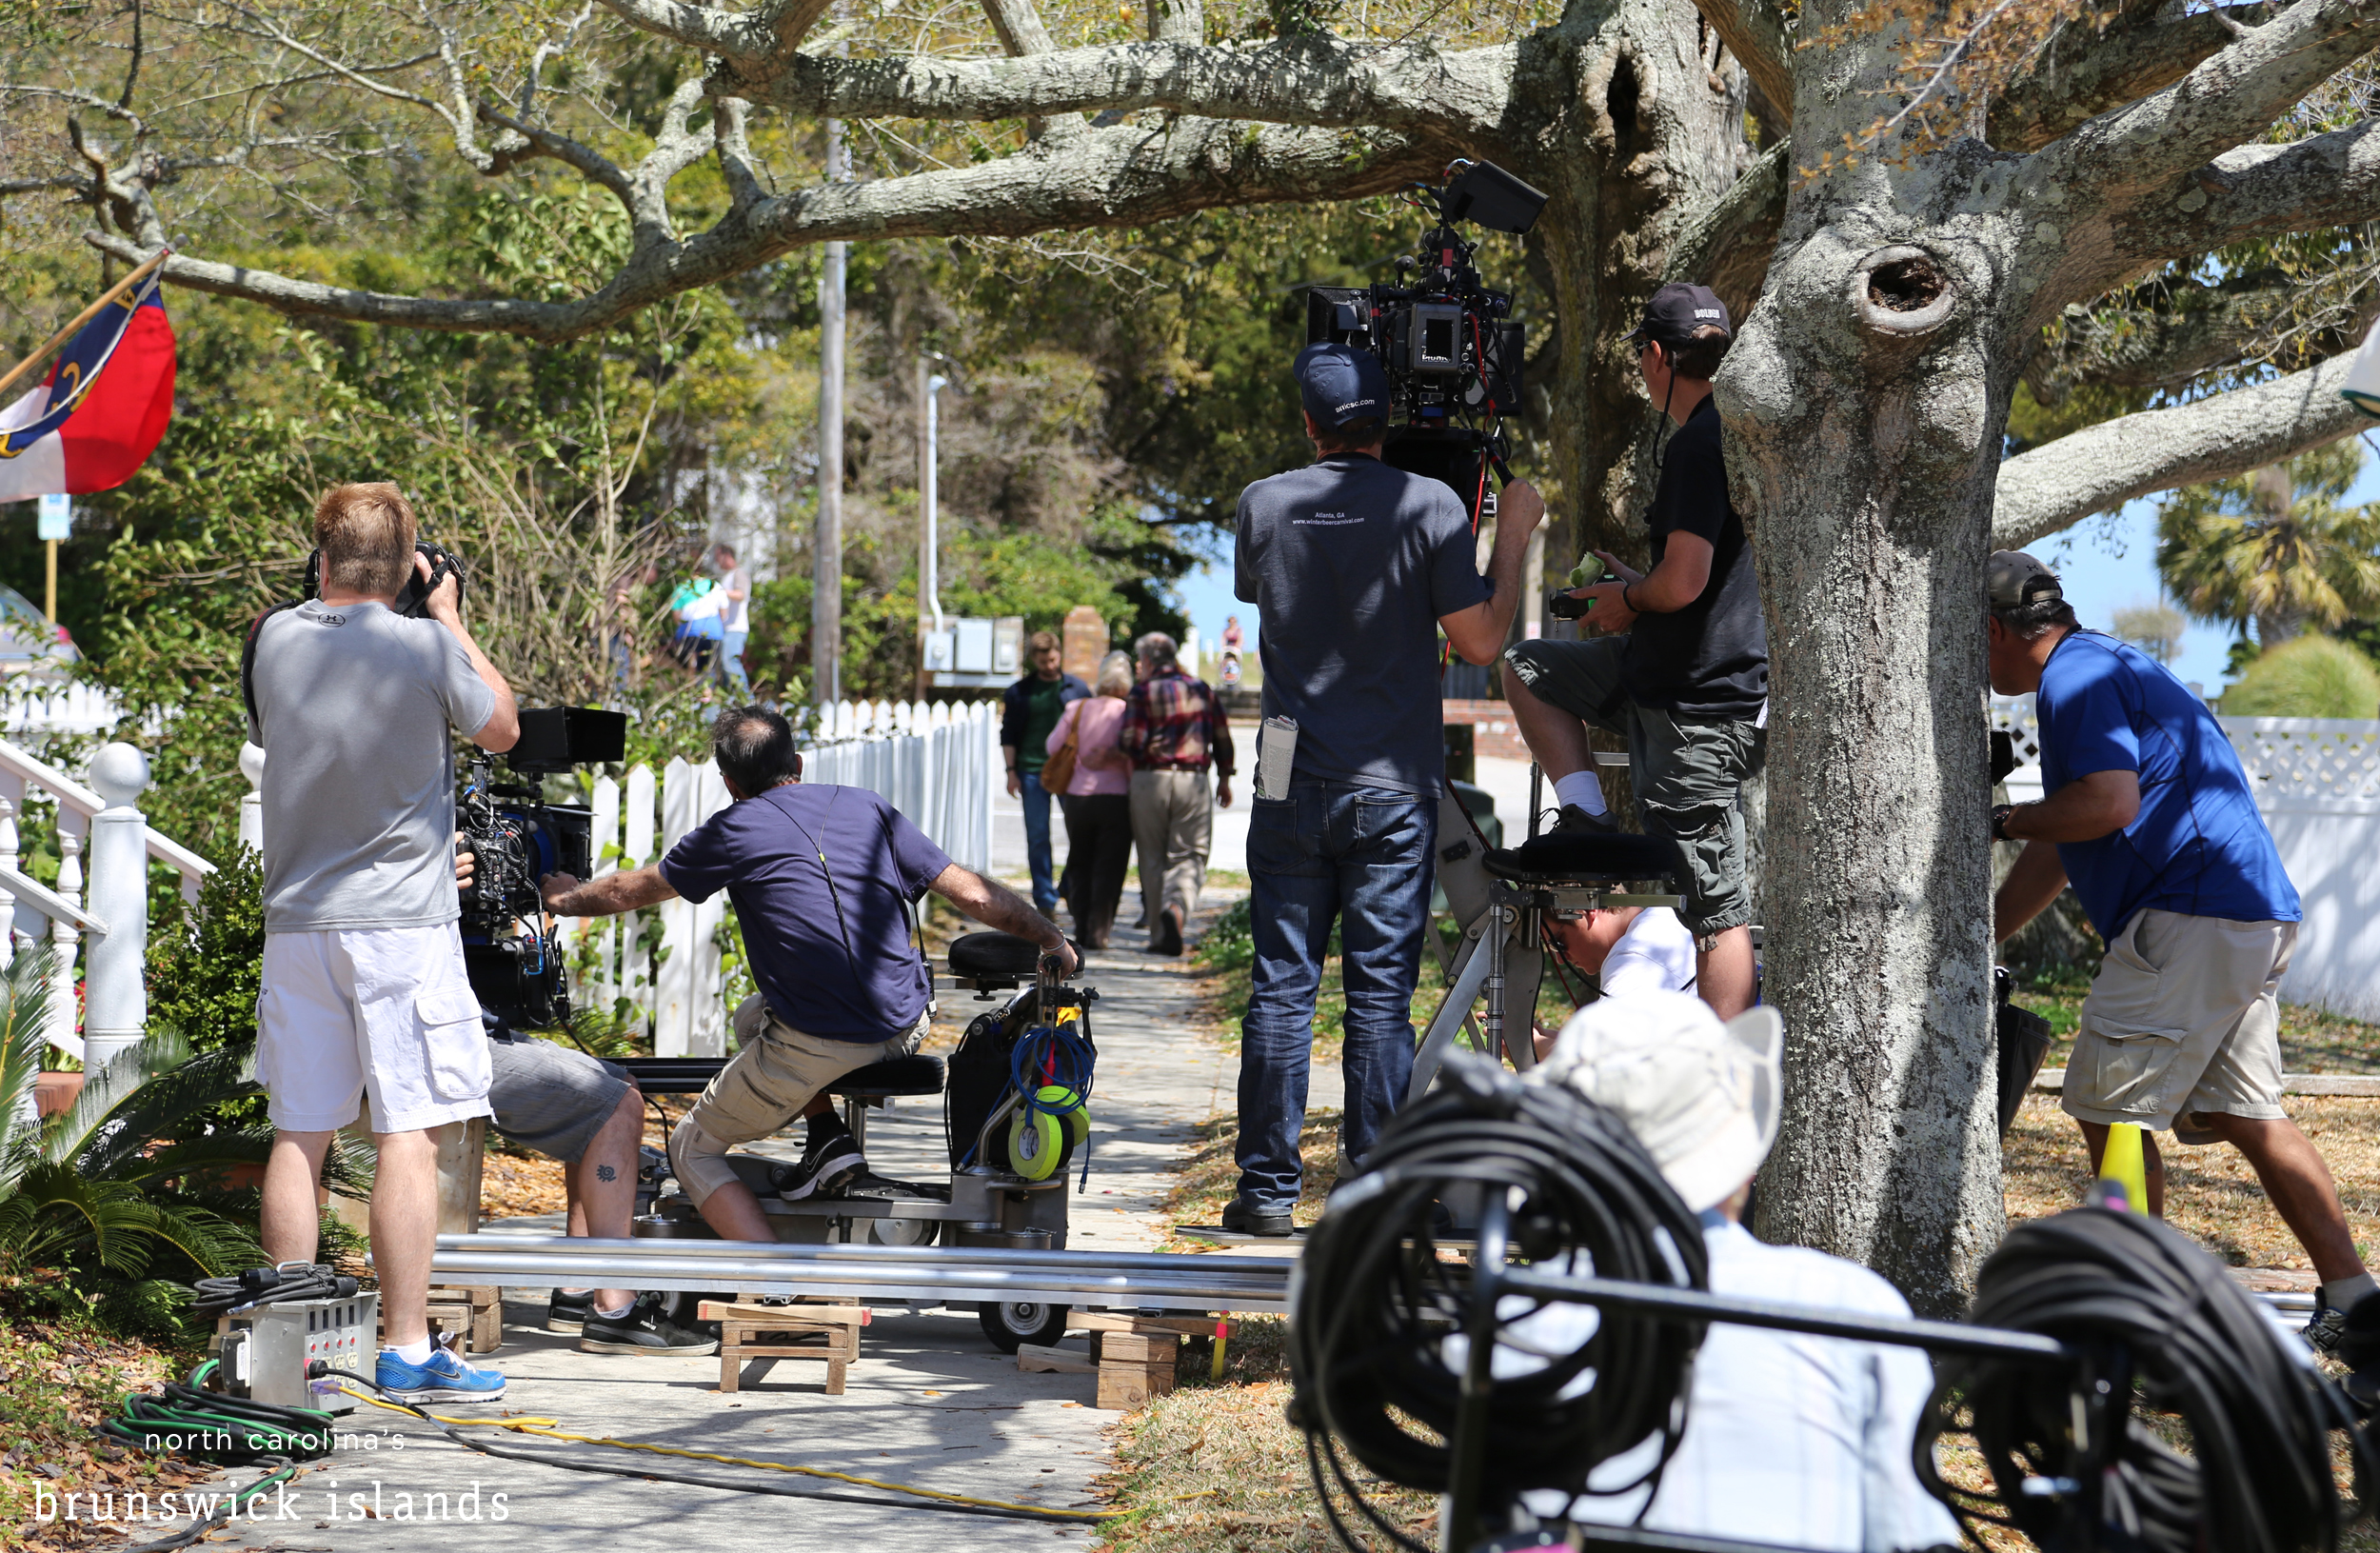 A movie crew films on location in Southport, NC in the Brunswick Islands